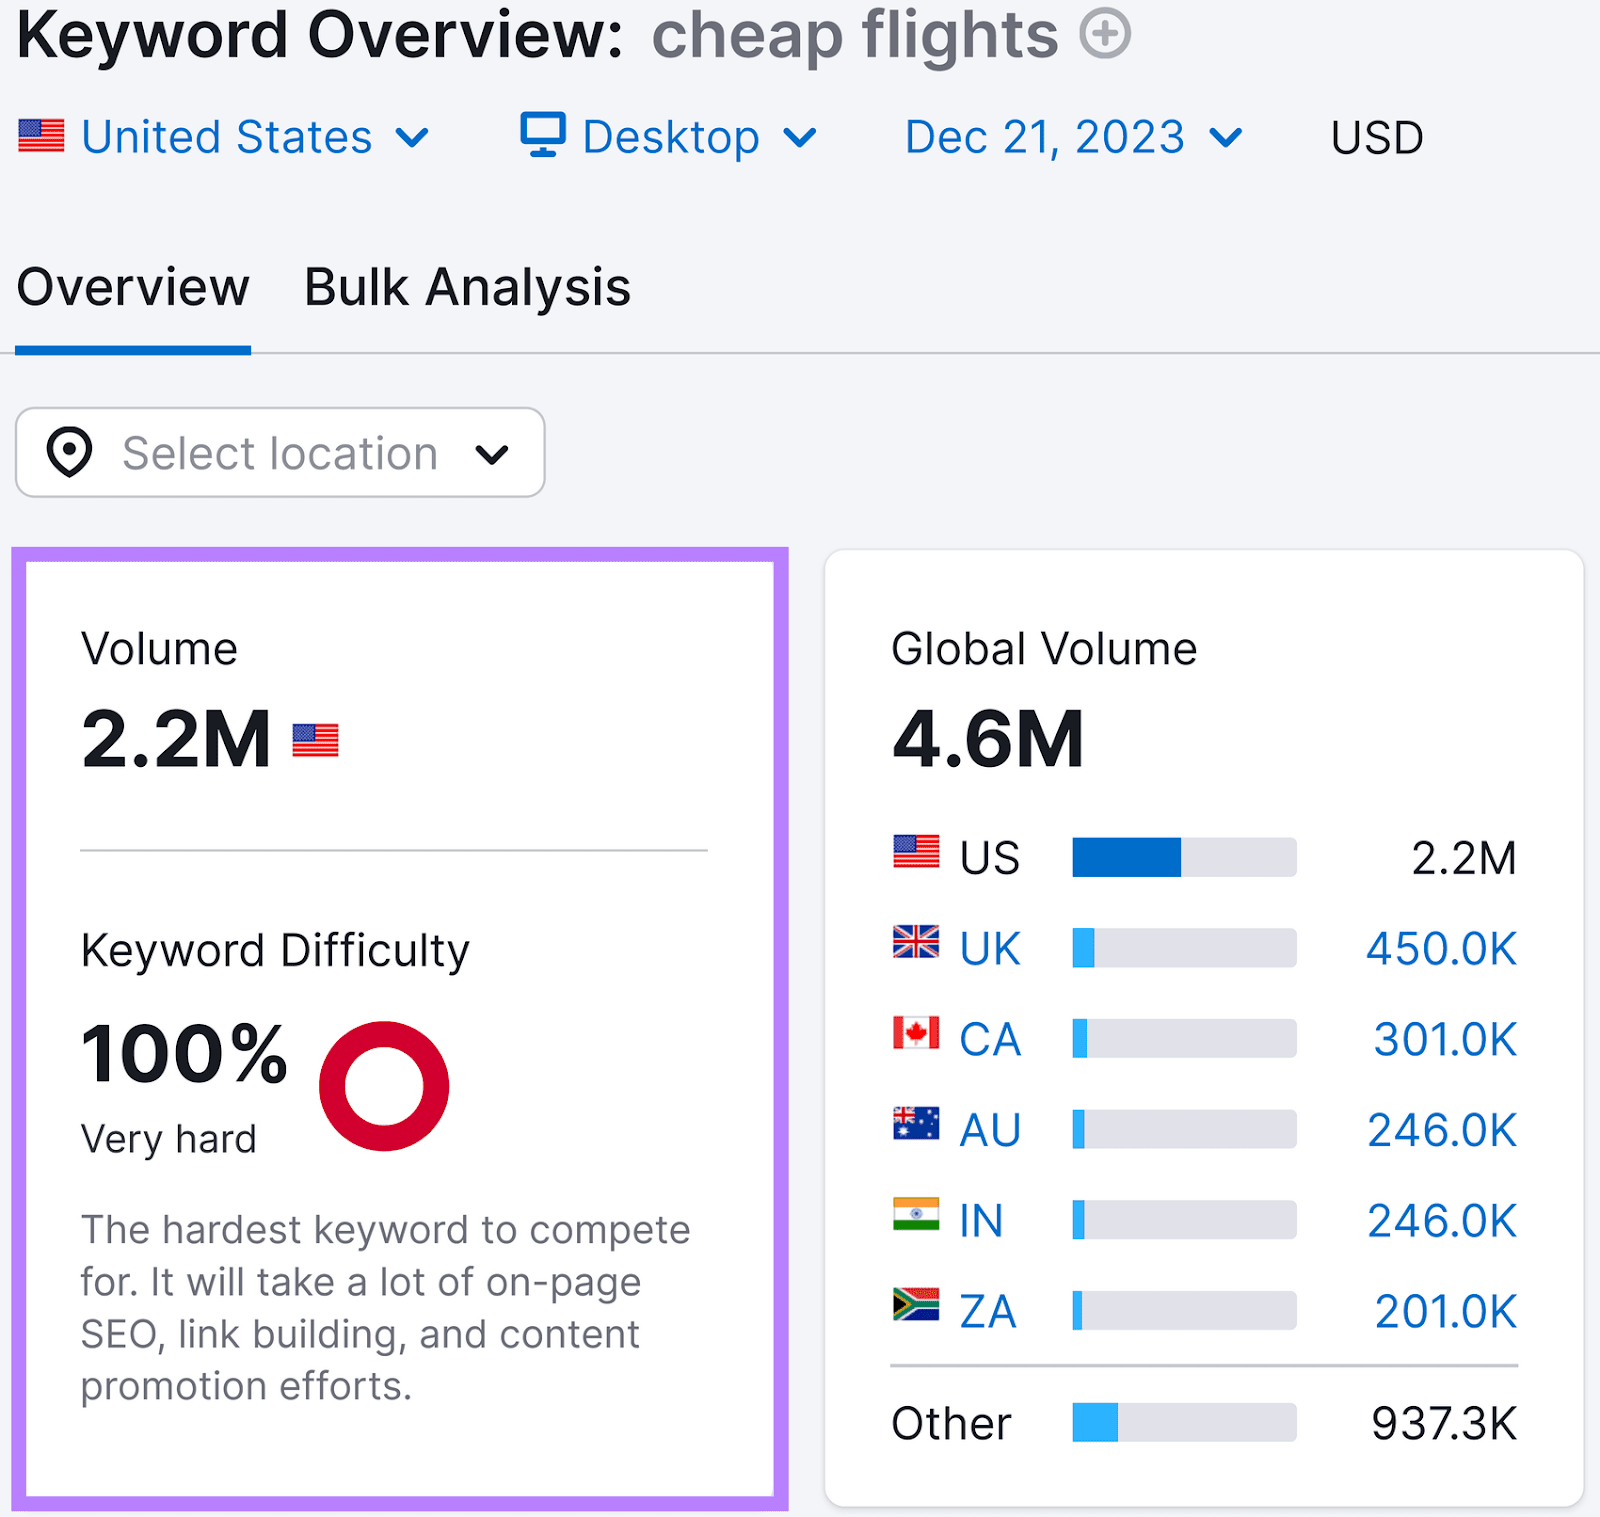 Keyword Overview results for "cheap flights" show a volume of 2.2M and keyword difficulty of 100%